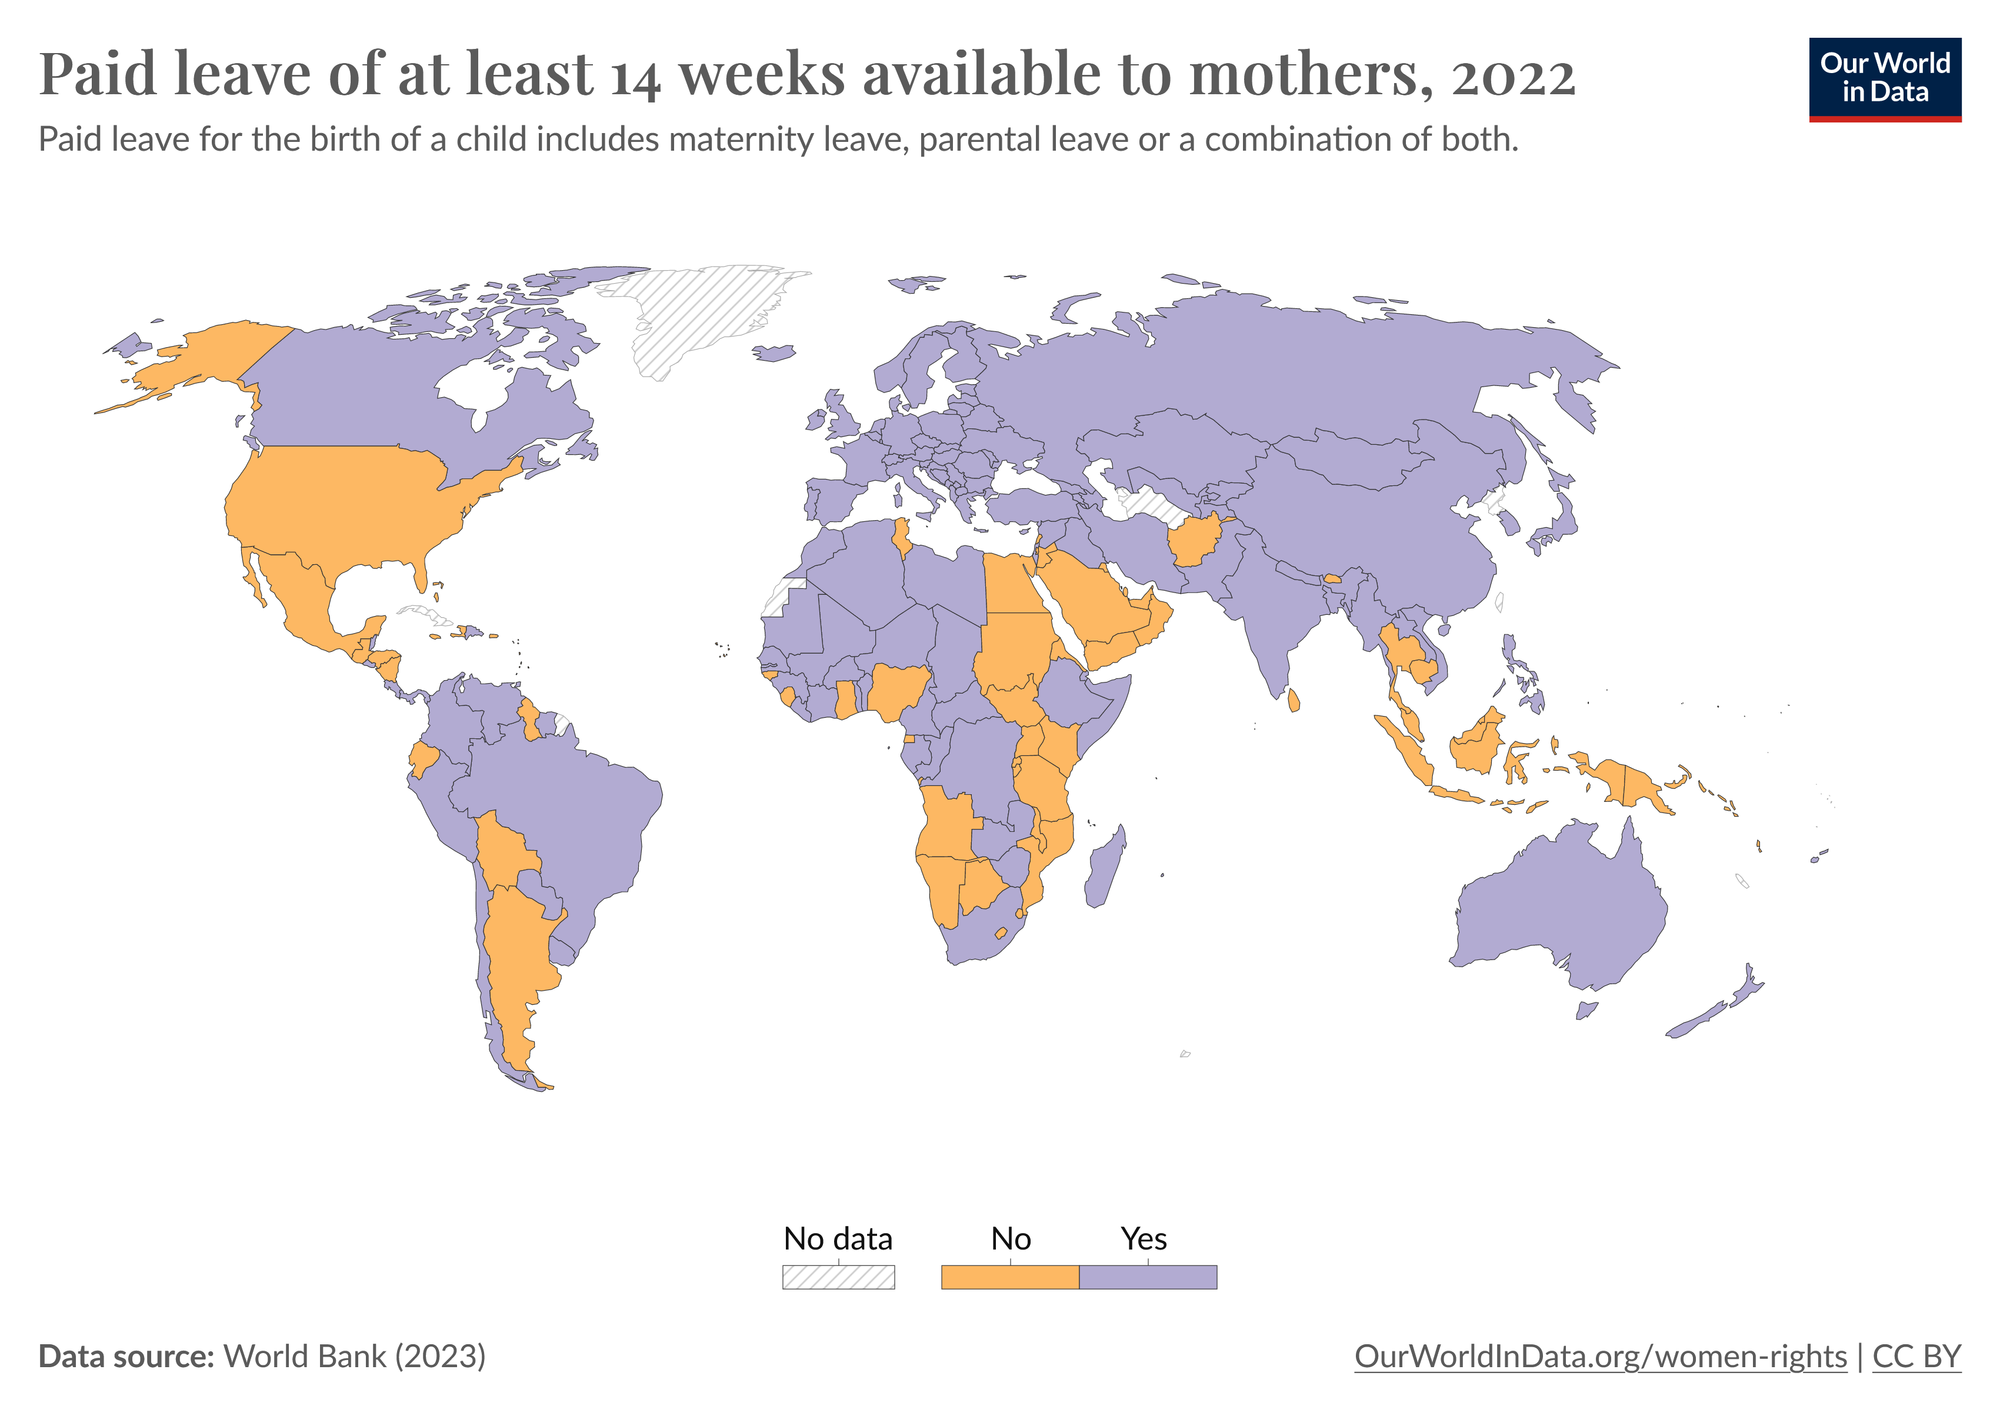 paid-leave-at-least-14-weeks-mothers.png